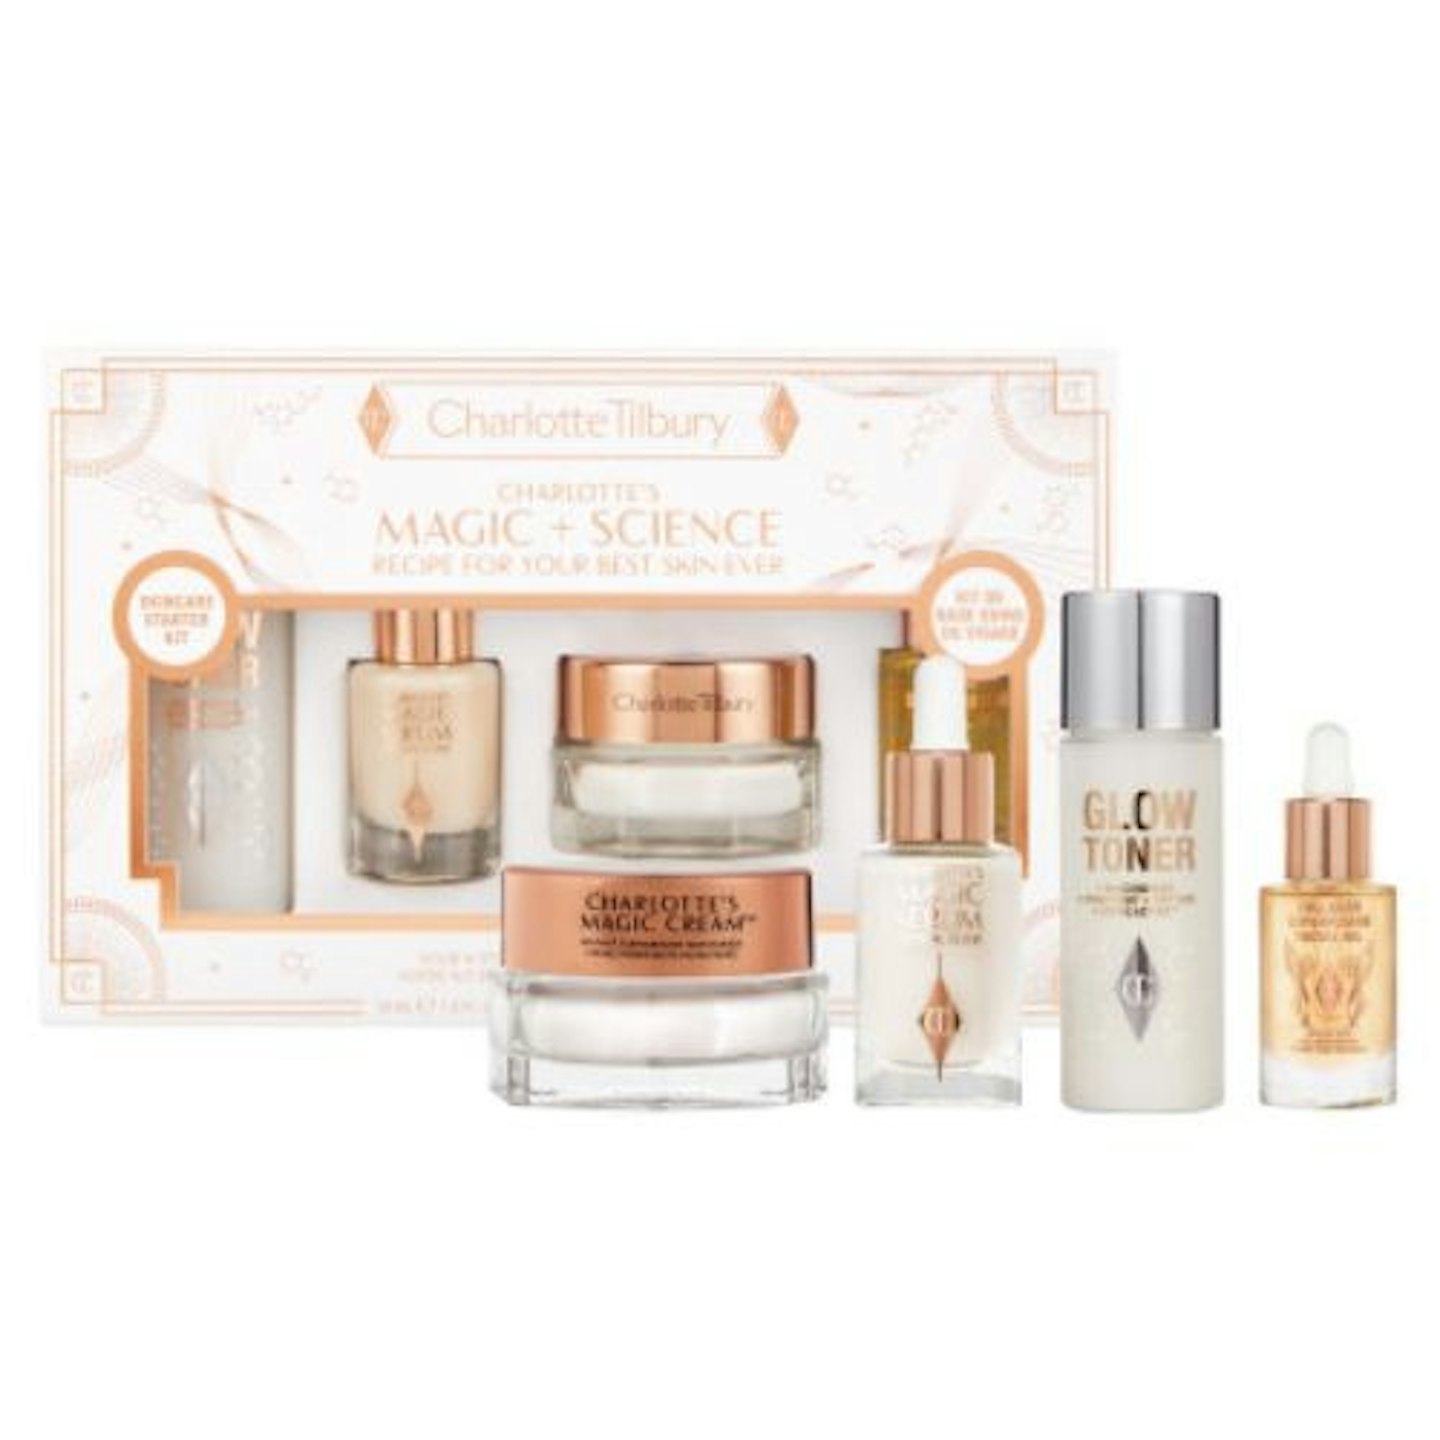 Charlotte Tilbury's Magic And Science Recipe For Your Best Skin Ever